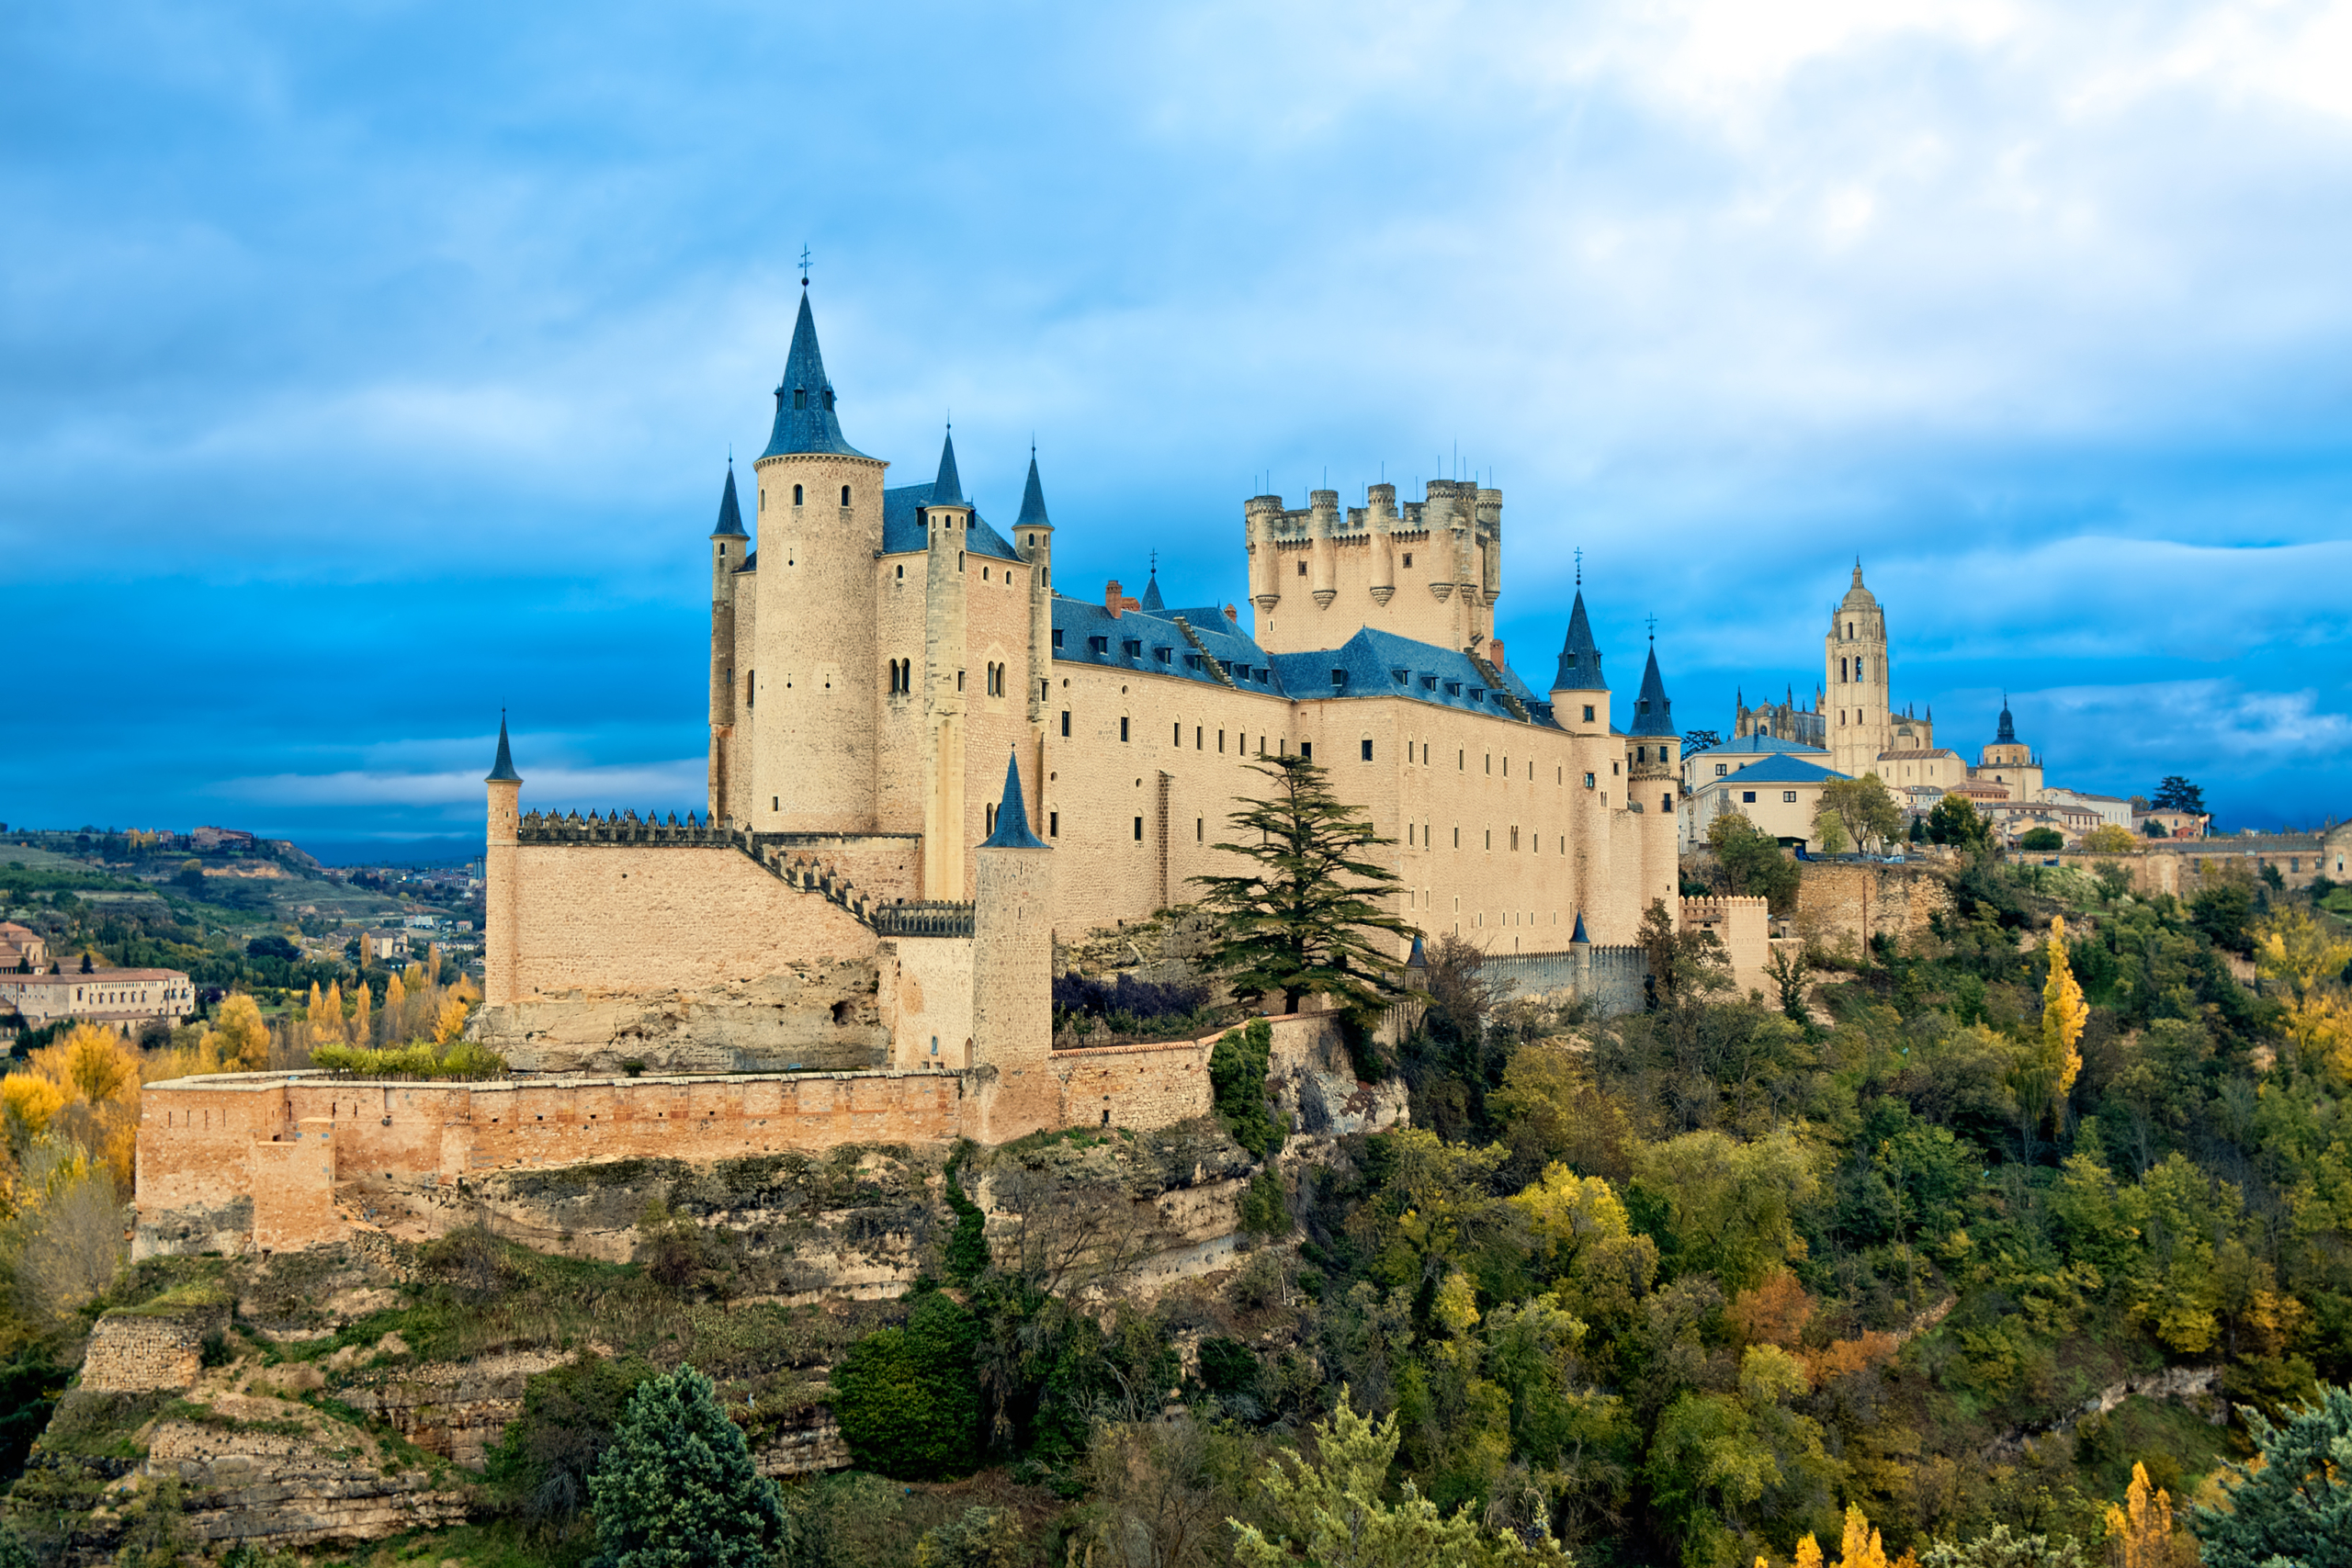 Stay & Dine in Spain - journeyPod - Luxury Vacation Travel Guide